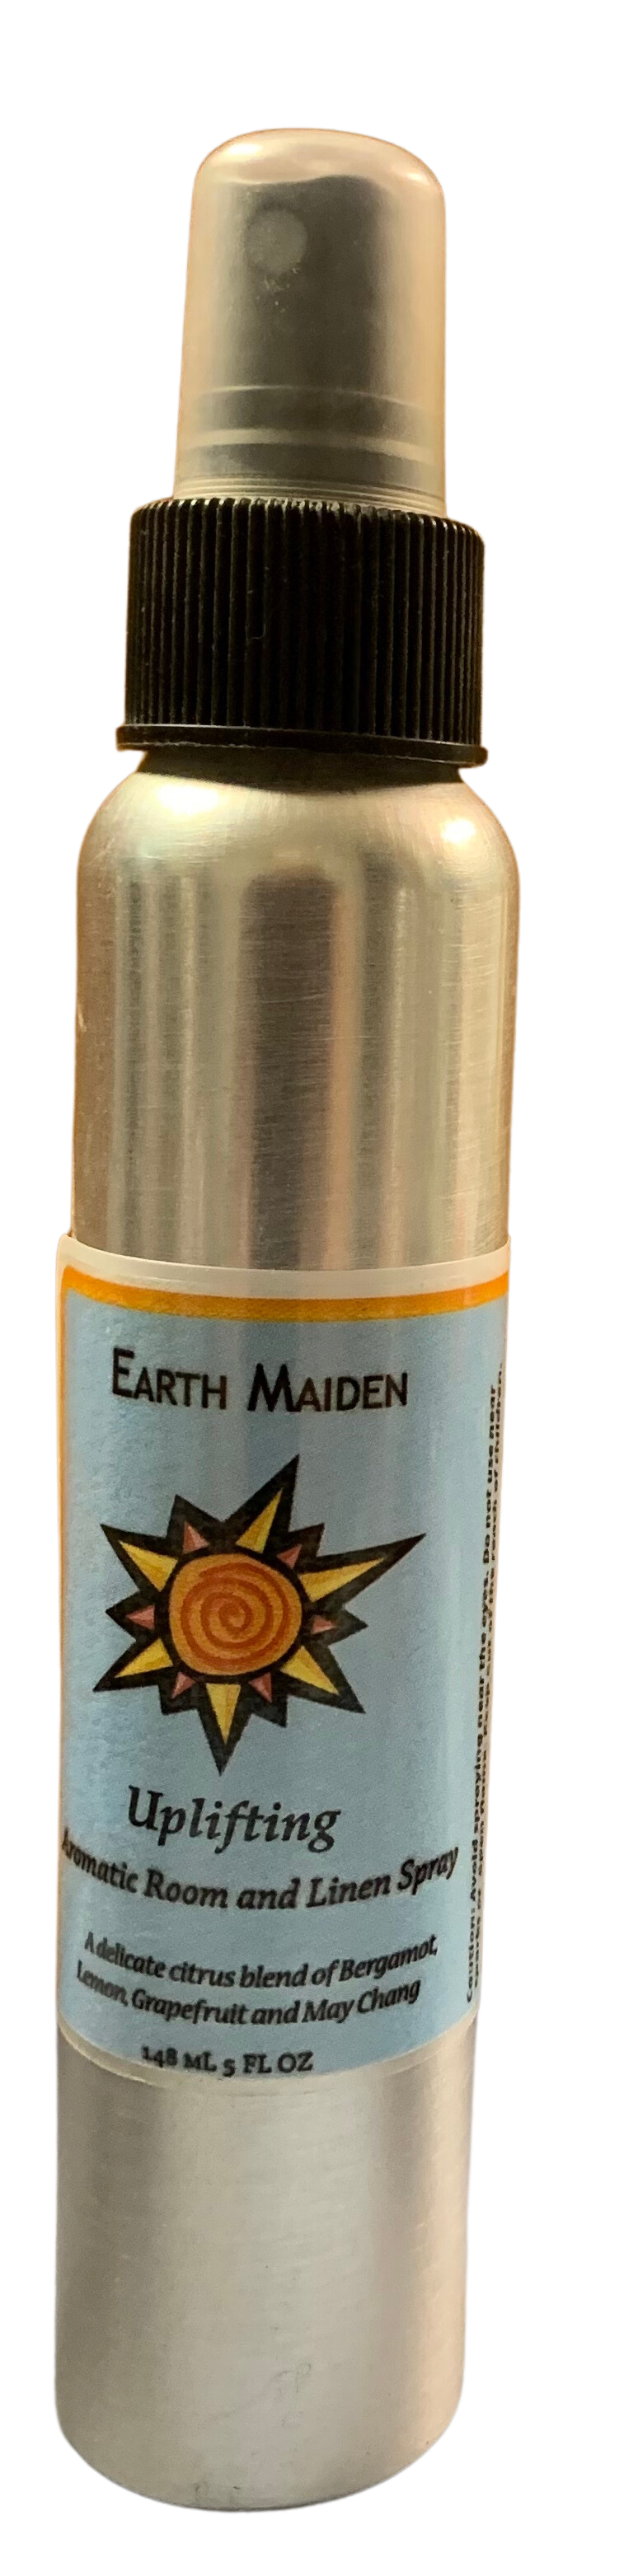 All Natural Uplifting Aroma Mist with Bergamot, Lemon, Grapefruit and May Chang Essential Oils in 5 ounce metal bullet container with fine mist sprayer.